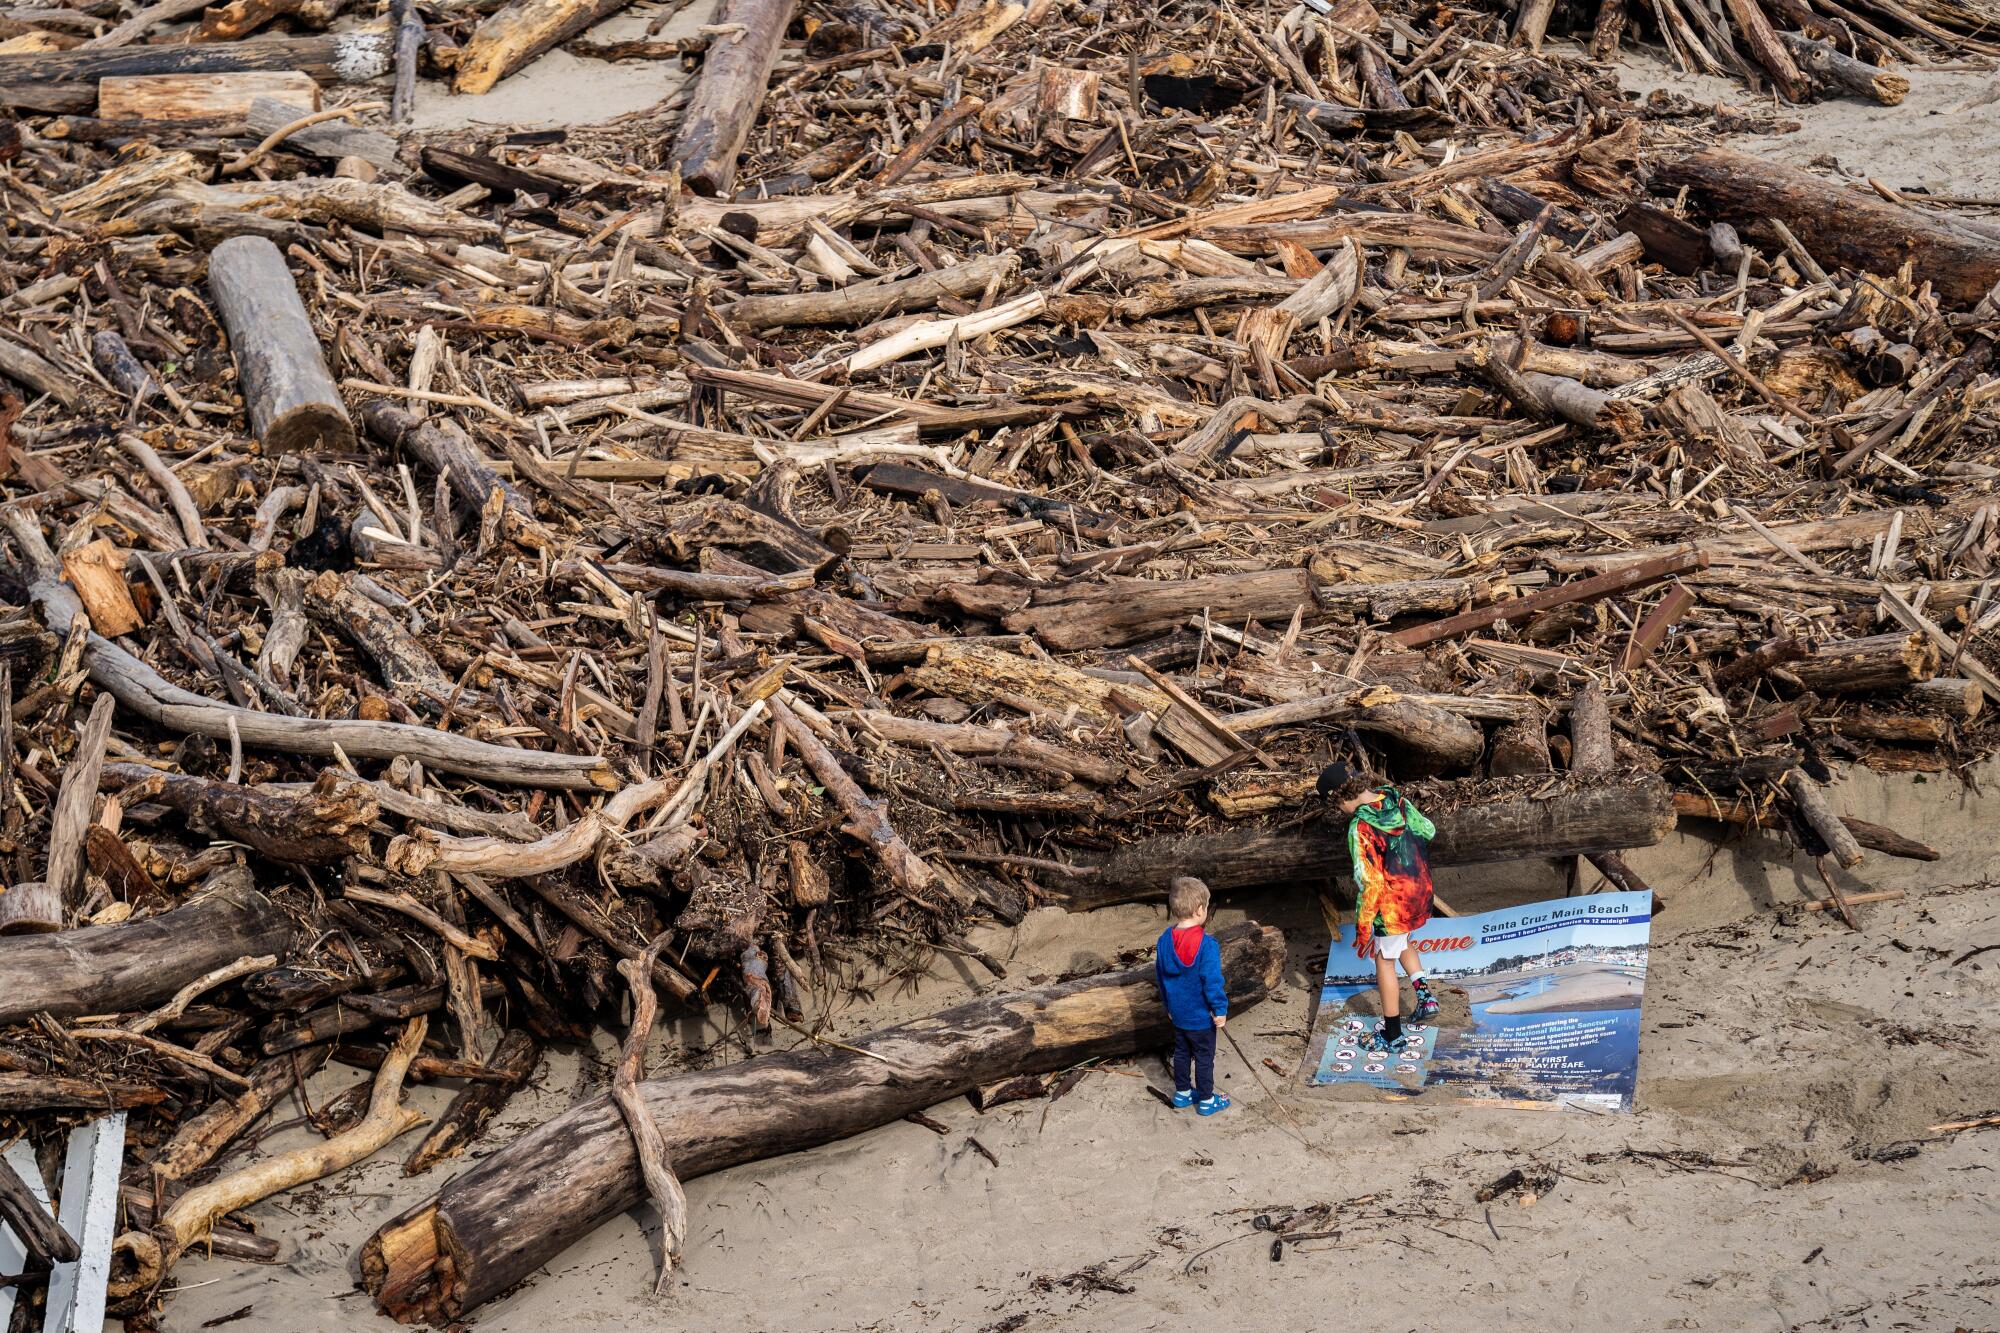 Two people stand in front of tree debris washed ashore on sand.